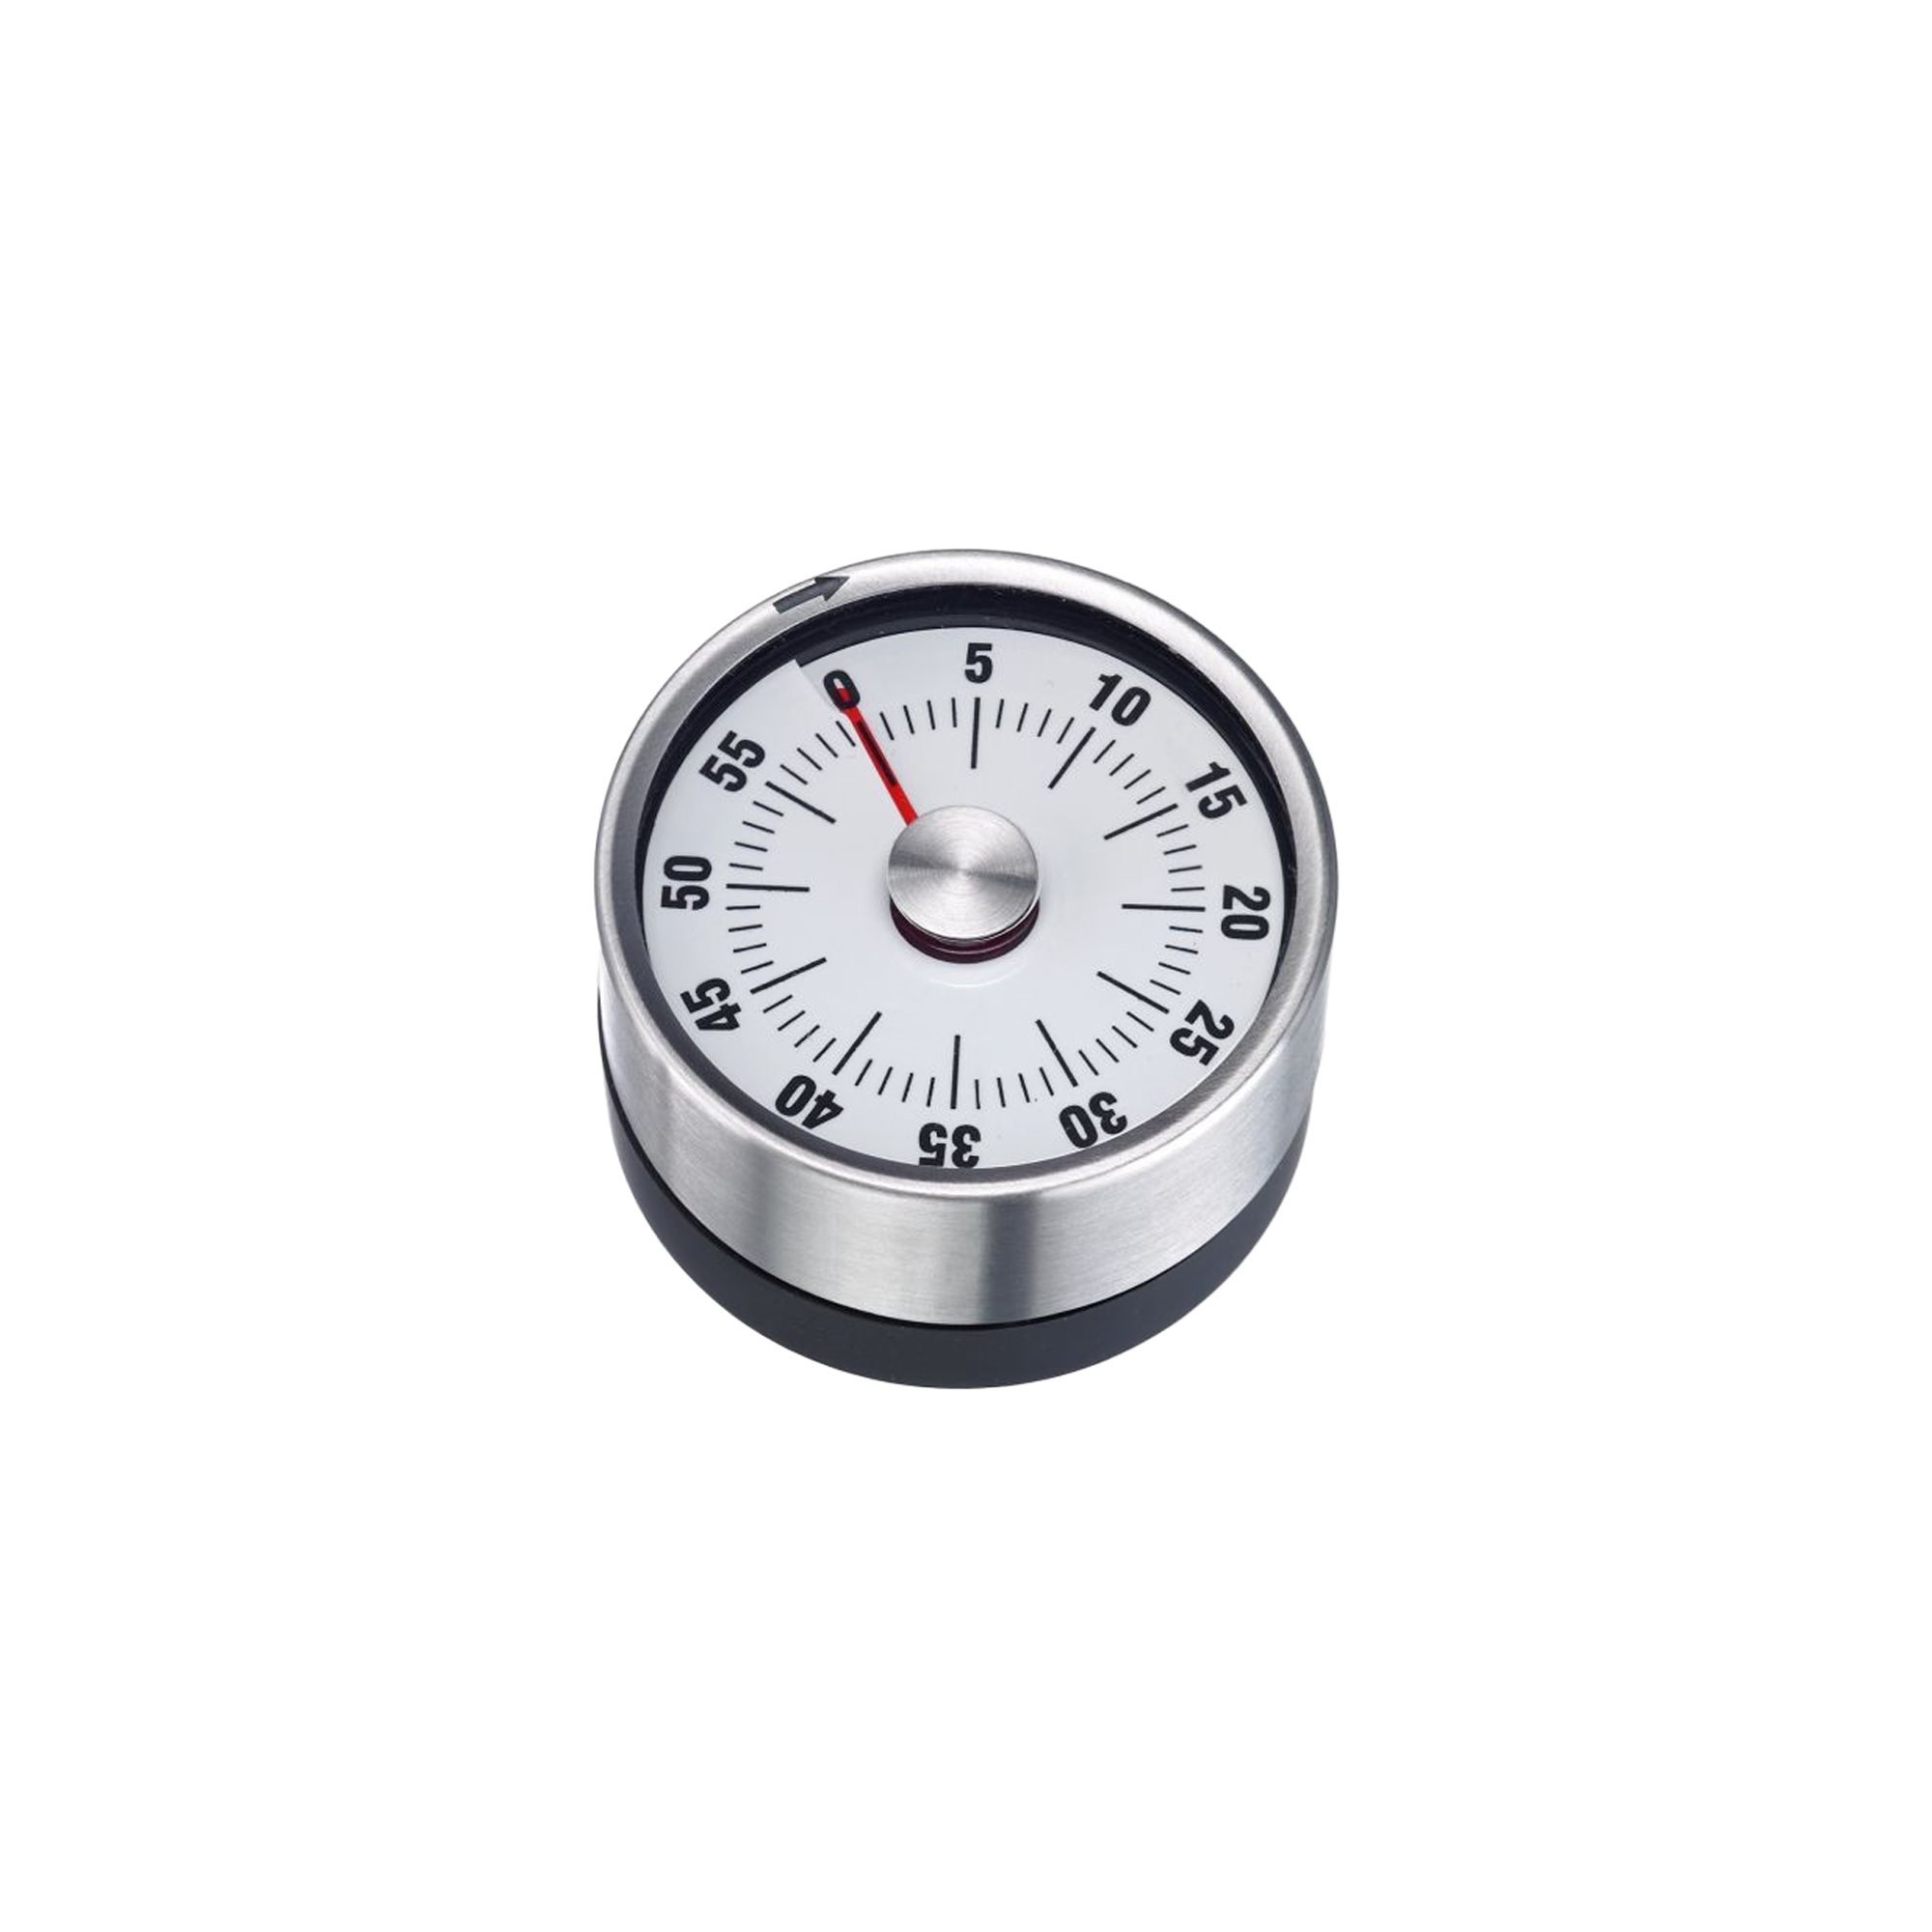 Oven thermometer - Westmark Shop